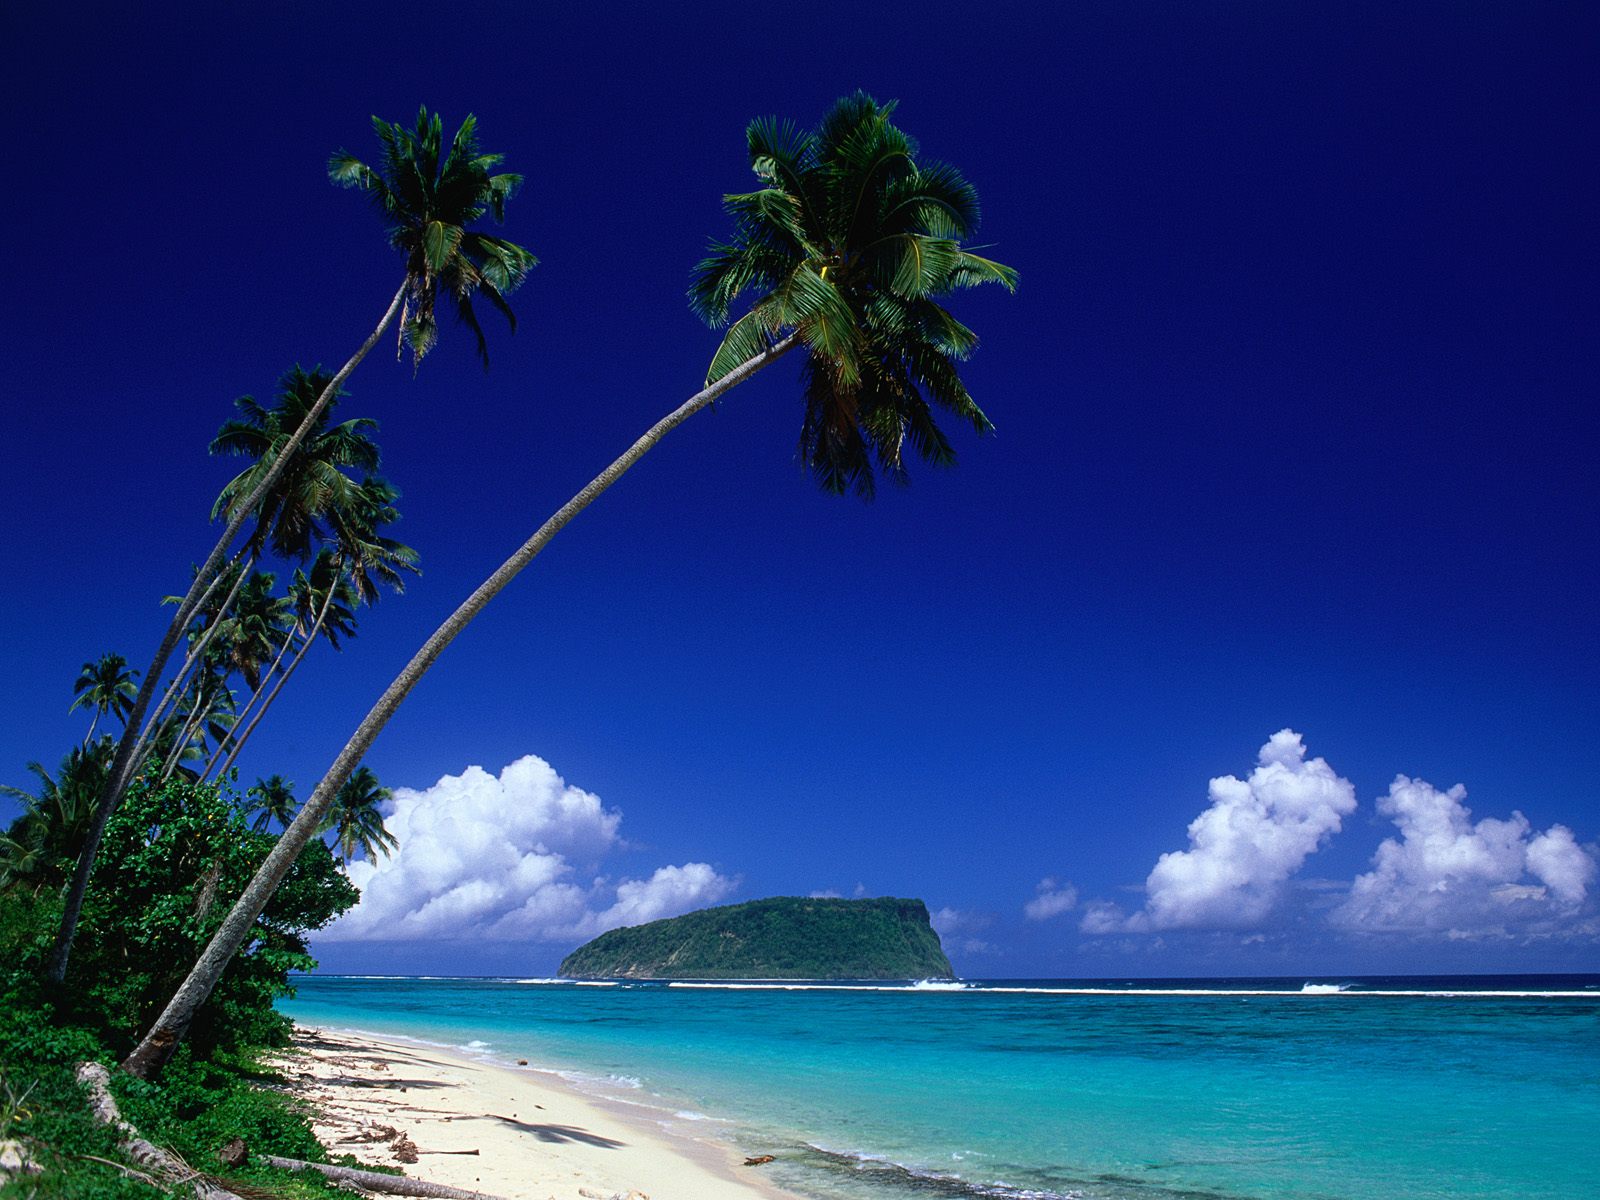 Beach Live Wallpaper Apk Which Is Under The